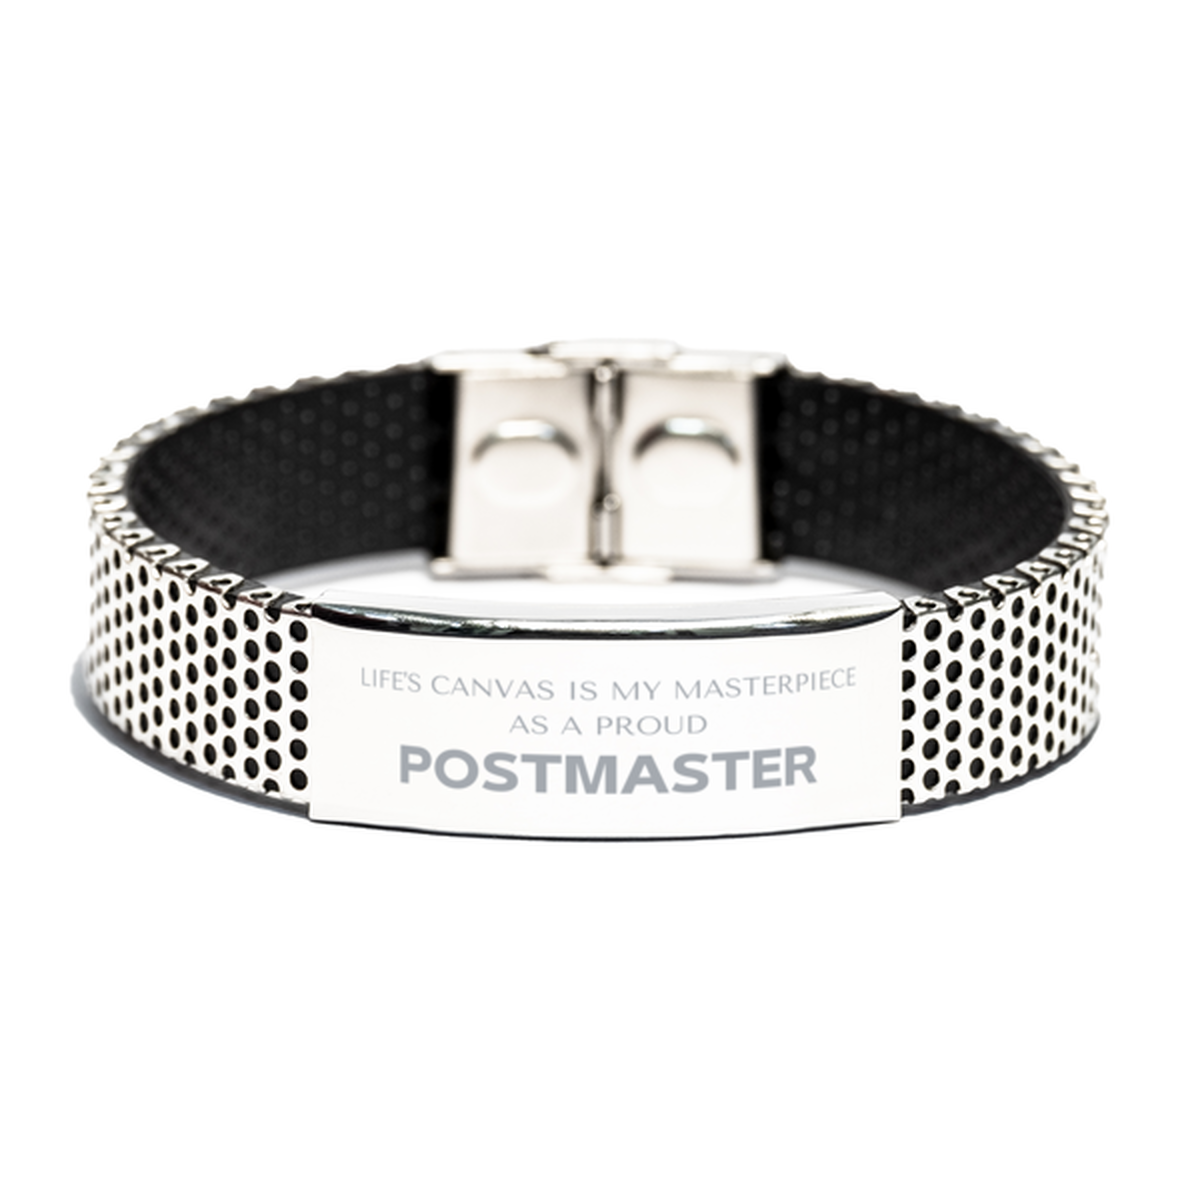 Proud Postmaster Gifts, Life's canvas is my masterpiece, Epic Birthday Christmas Unique Stainless Steel Bracelet For Postmaster, Coworkers, Men, Women, Friends